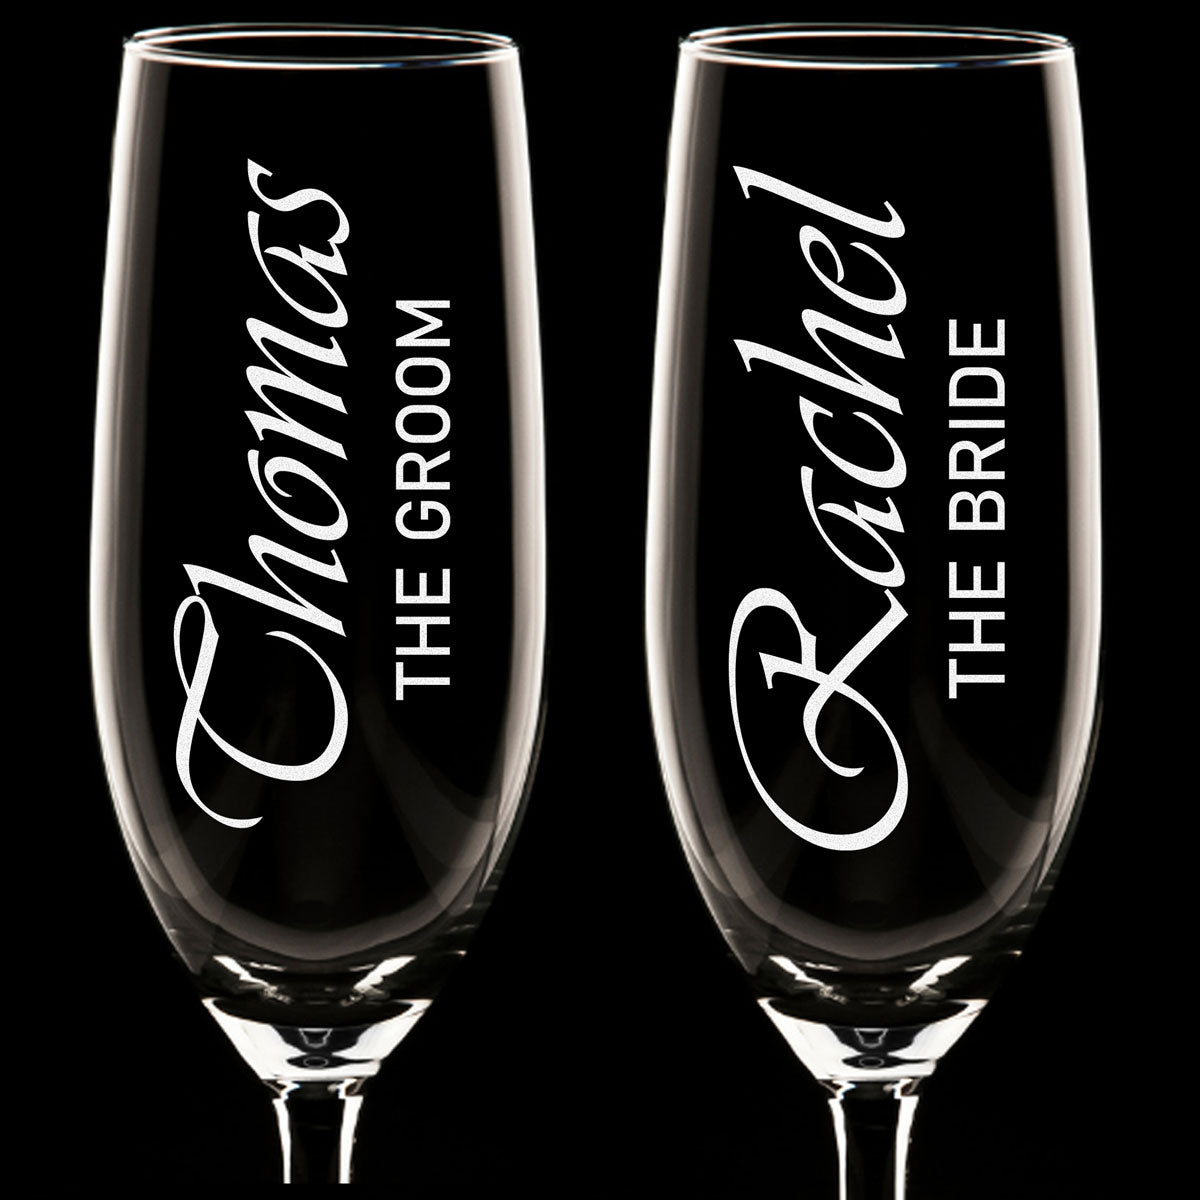 Set of 8 - Custom Engraved Bridal Party Wine Glass, Personalized Wine Glass